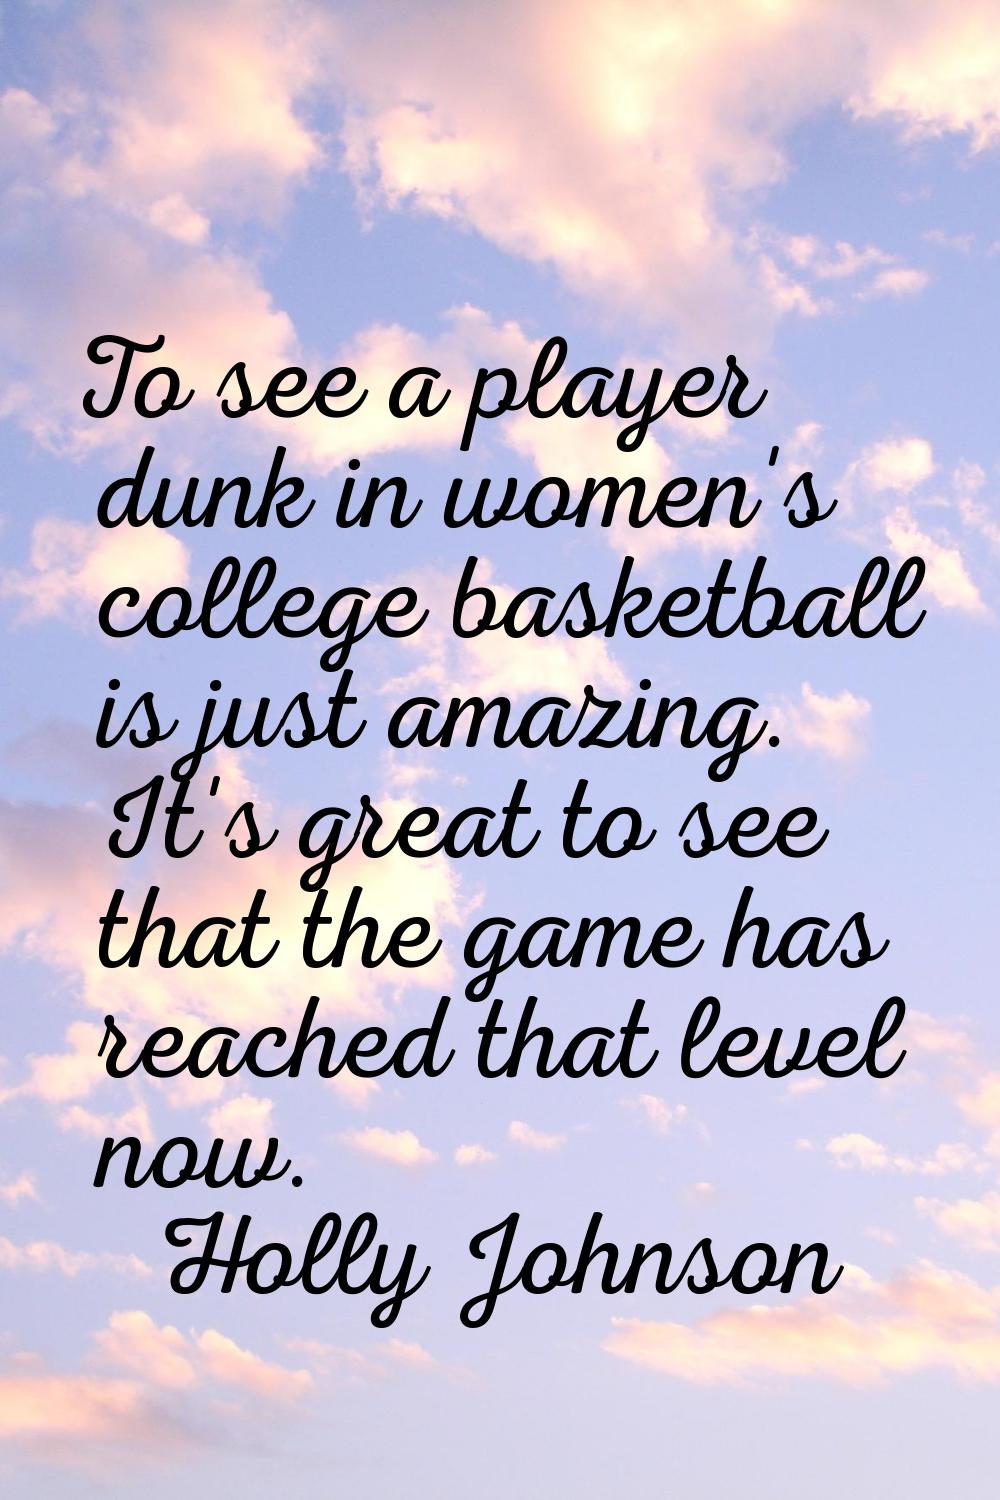 To see a player dunk in women's college basketball is just amazing. It's great to see that the game